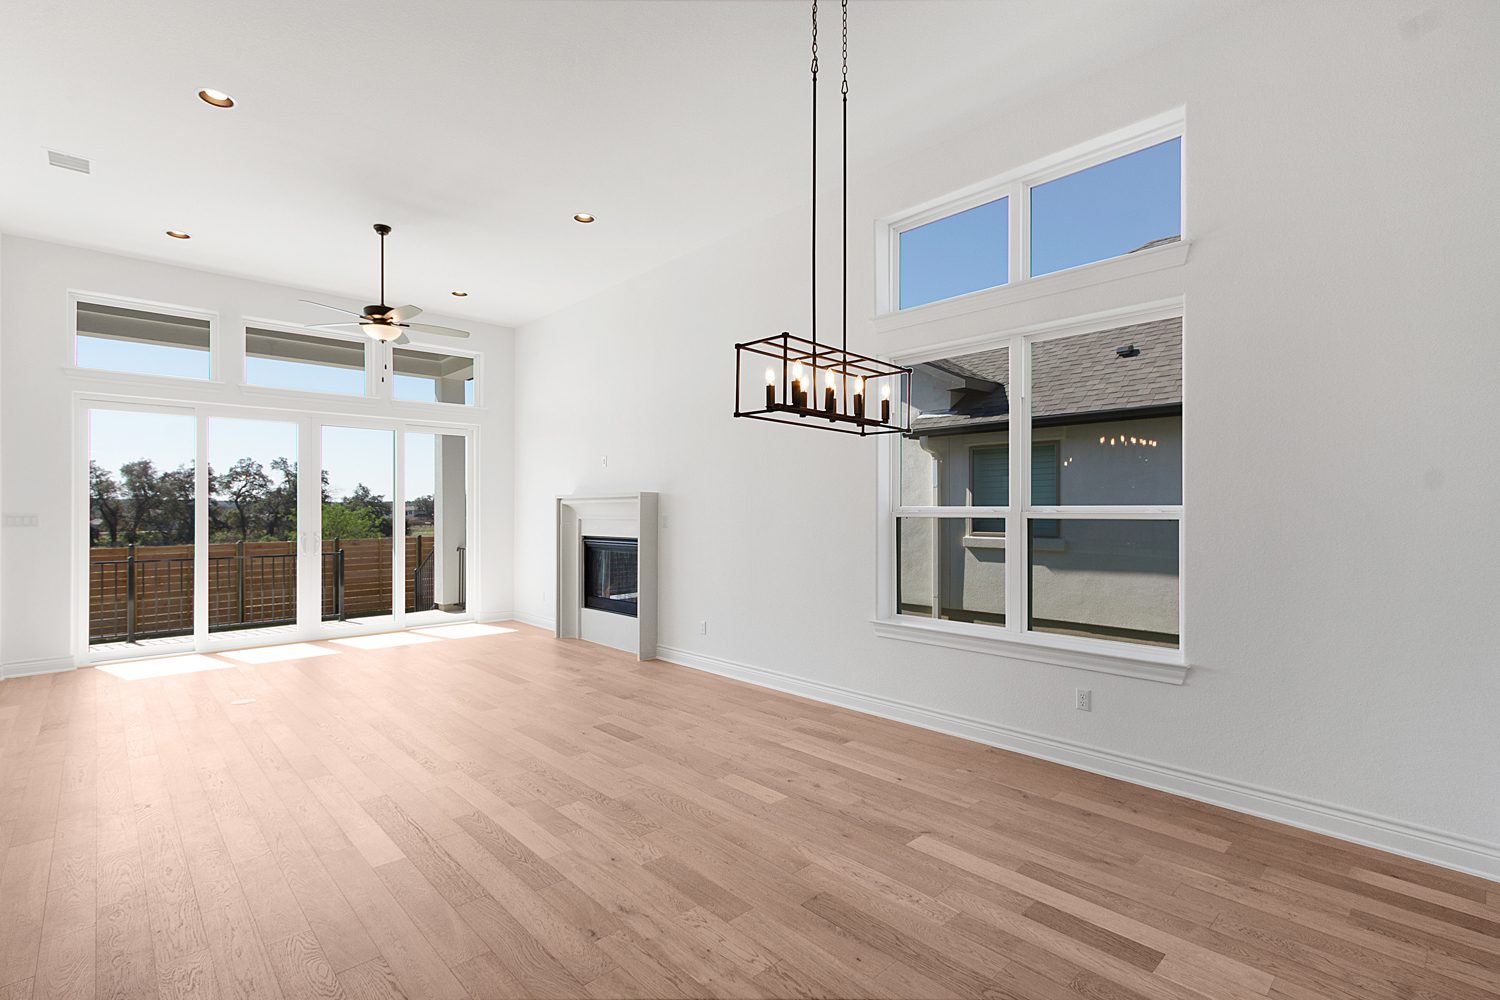 Volume ceilings and extra windows for natural light.